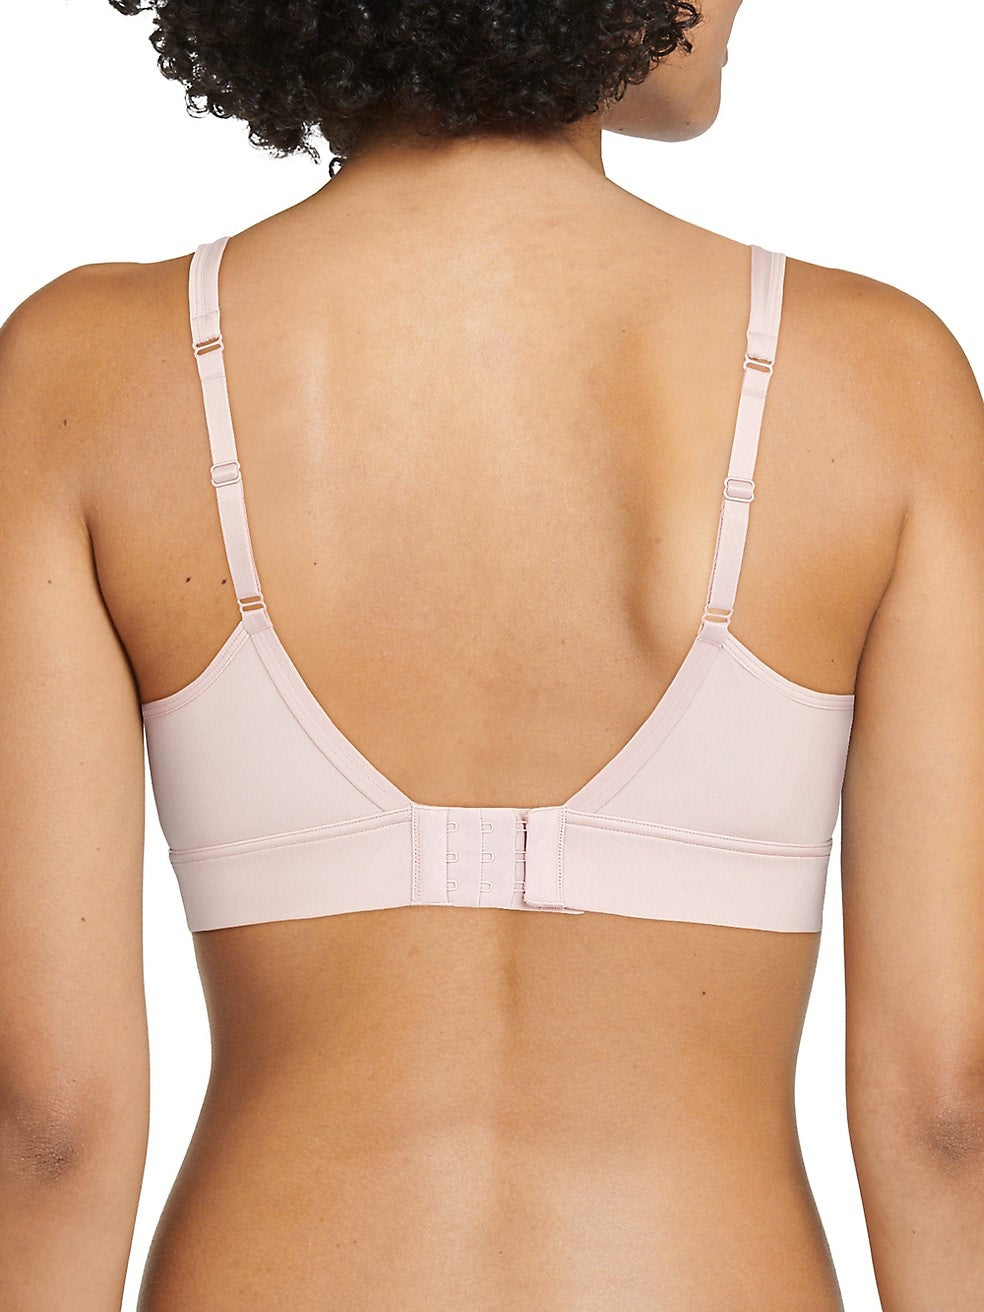 Jockey Forever Fit V-Neck Molded Cup Bra in White, Size Small